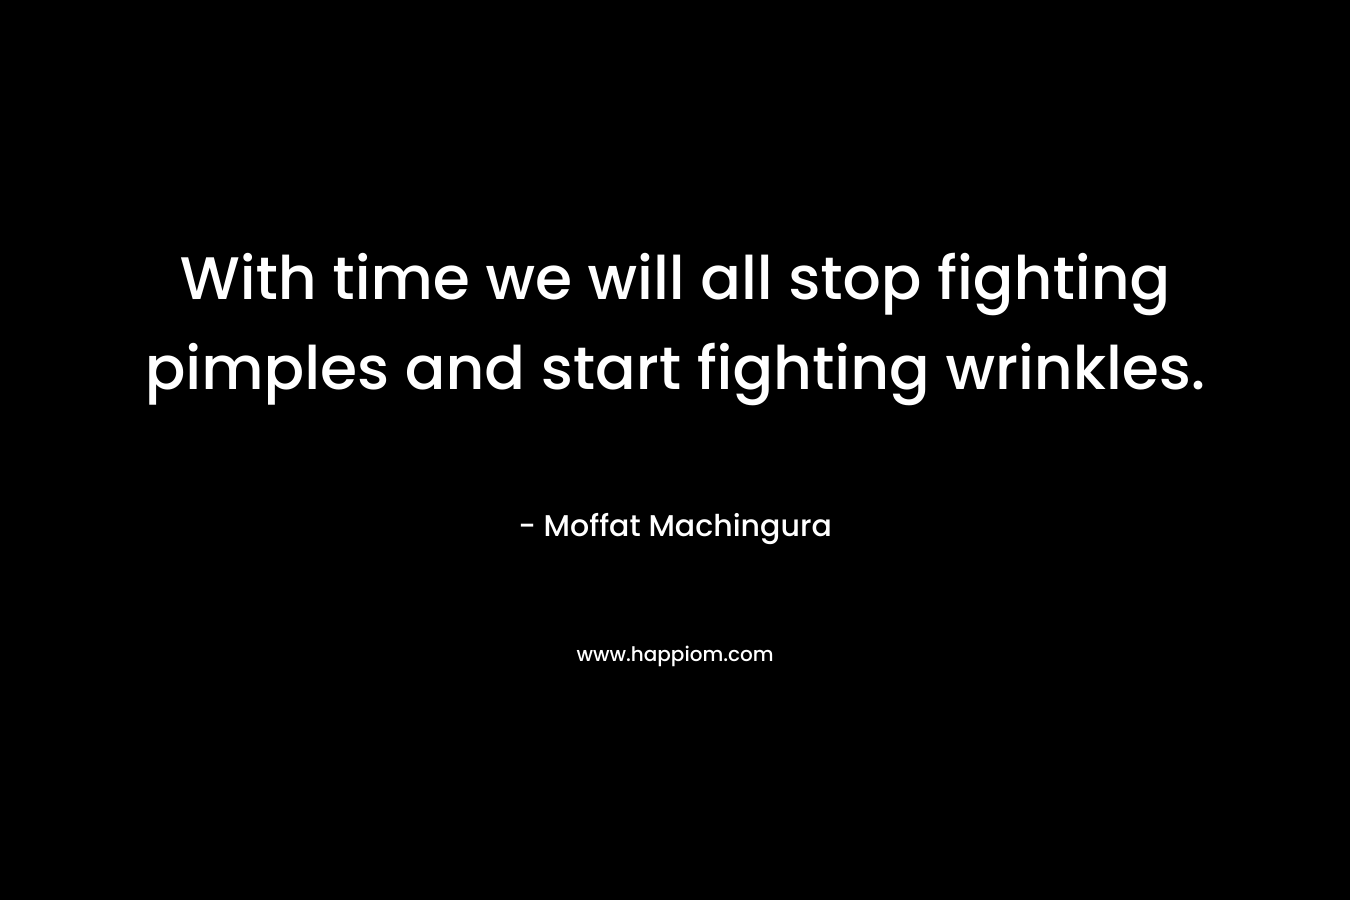 With time we will all stop fighting pimples and start fighting wrinkles. – Moffat Machingura